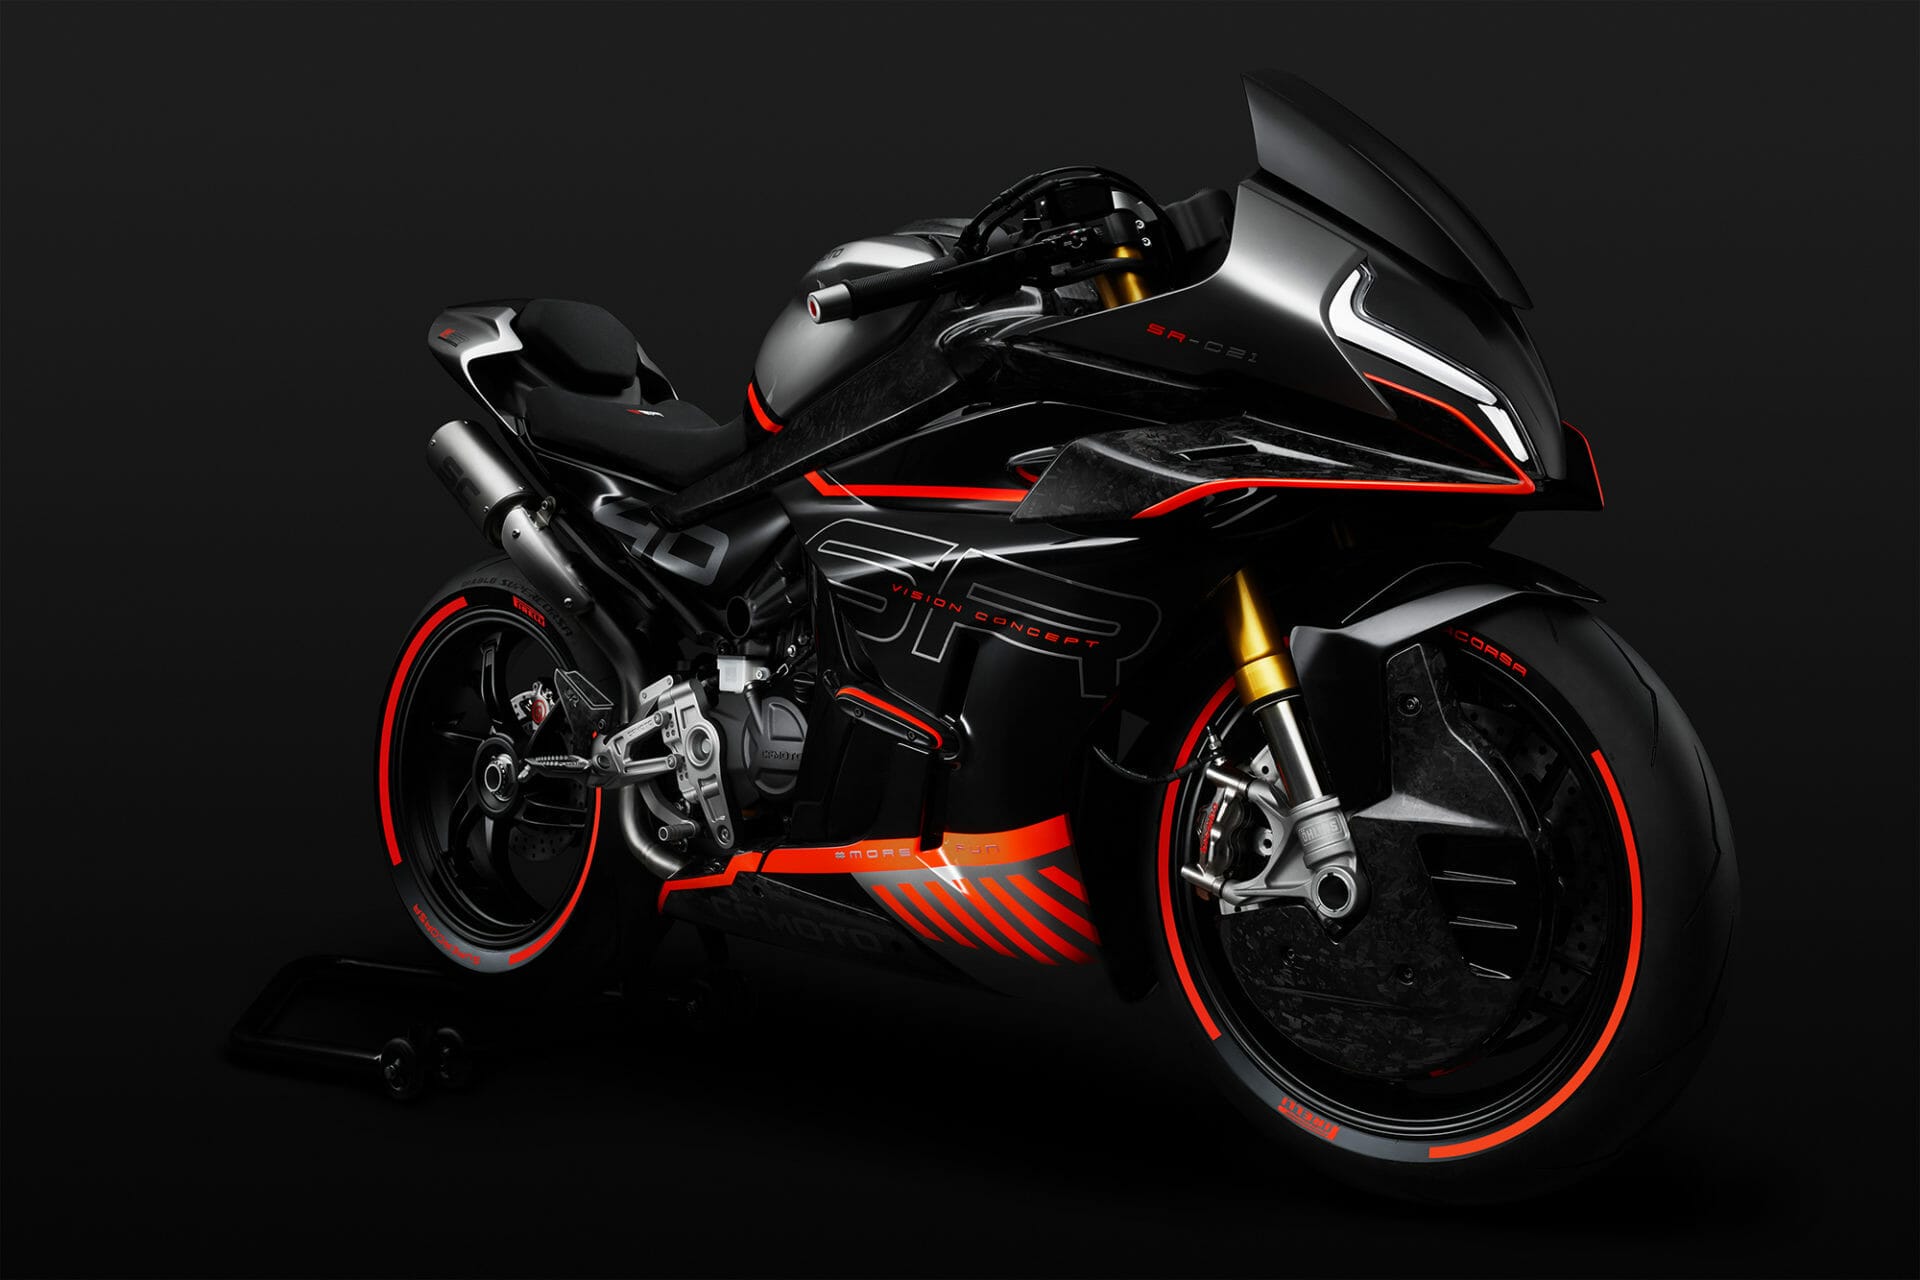 CFMoto SR-C21 Concept
- also in the MOTORCYCLES.NEWS APP